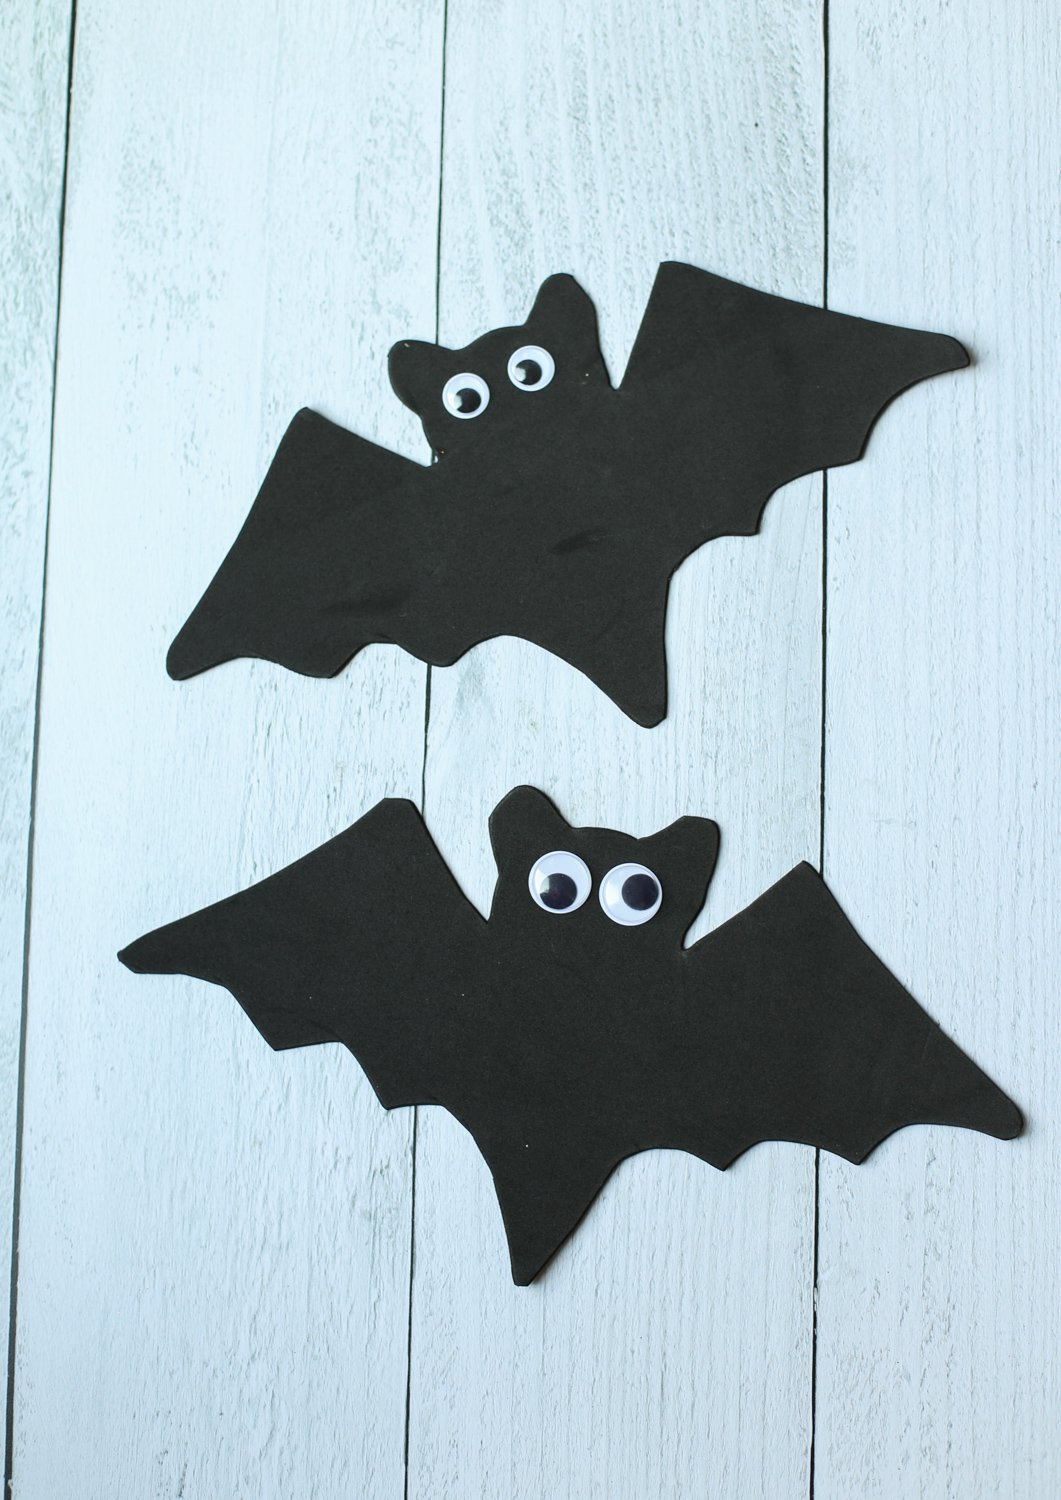 Black foam bats with googly eyes lined up.